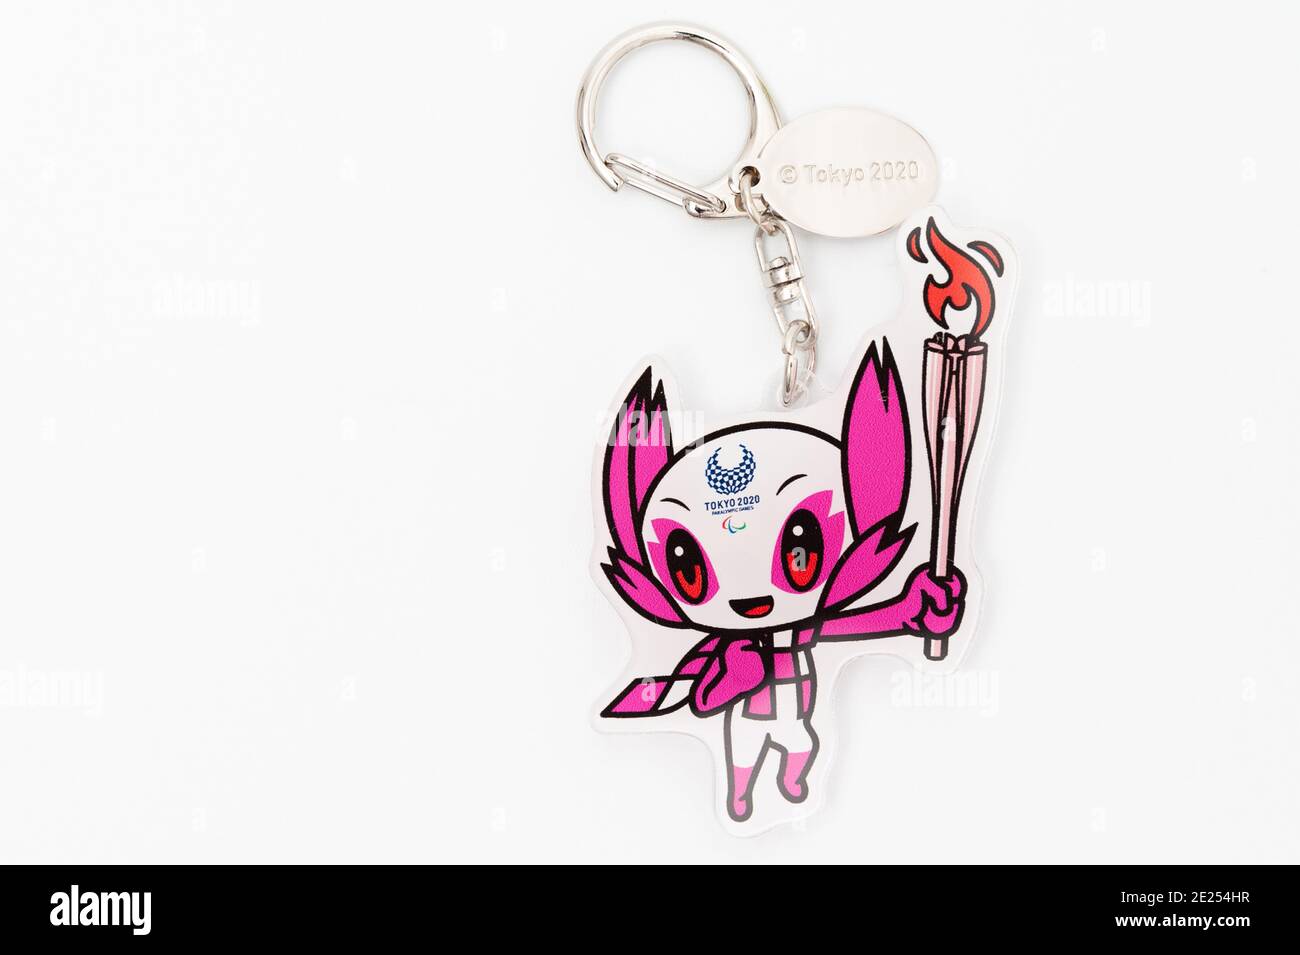 Tokyo, Japan - January 4, 2021: 2020 Tokyo Olympic Mascot Someity keychain official licensed. Copy space. Isolated on white background. Stock Photo